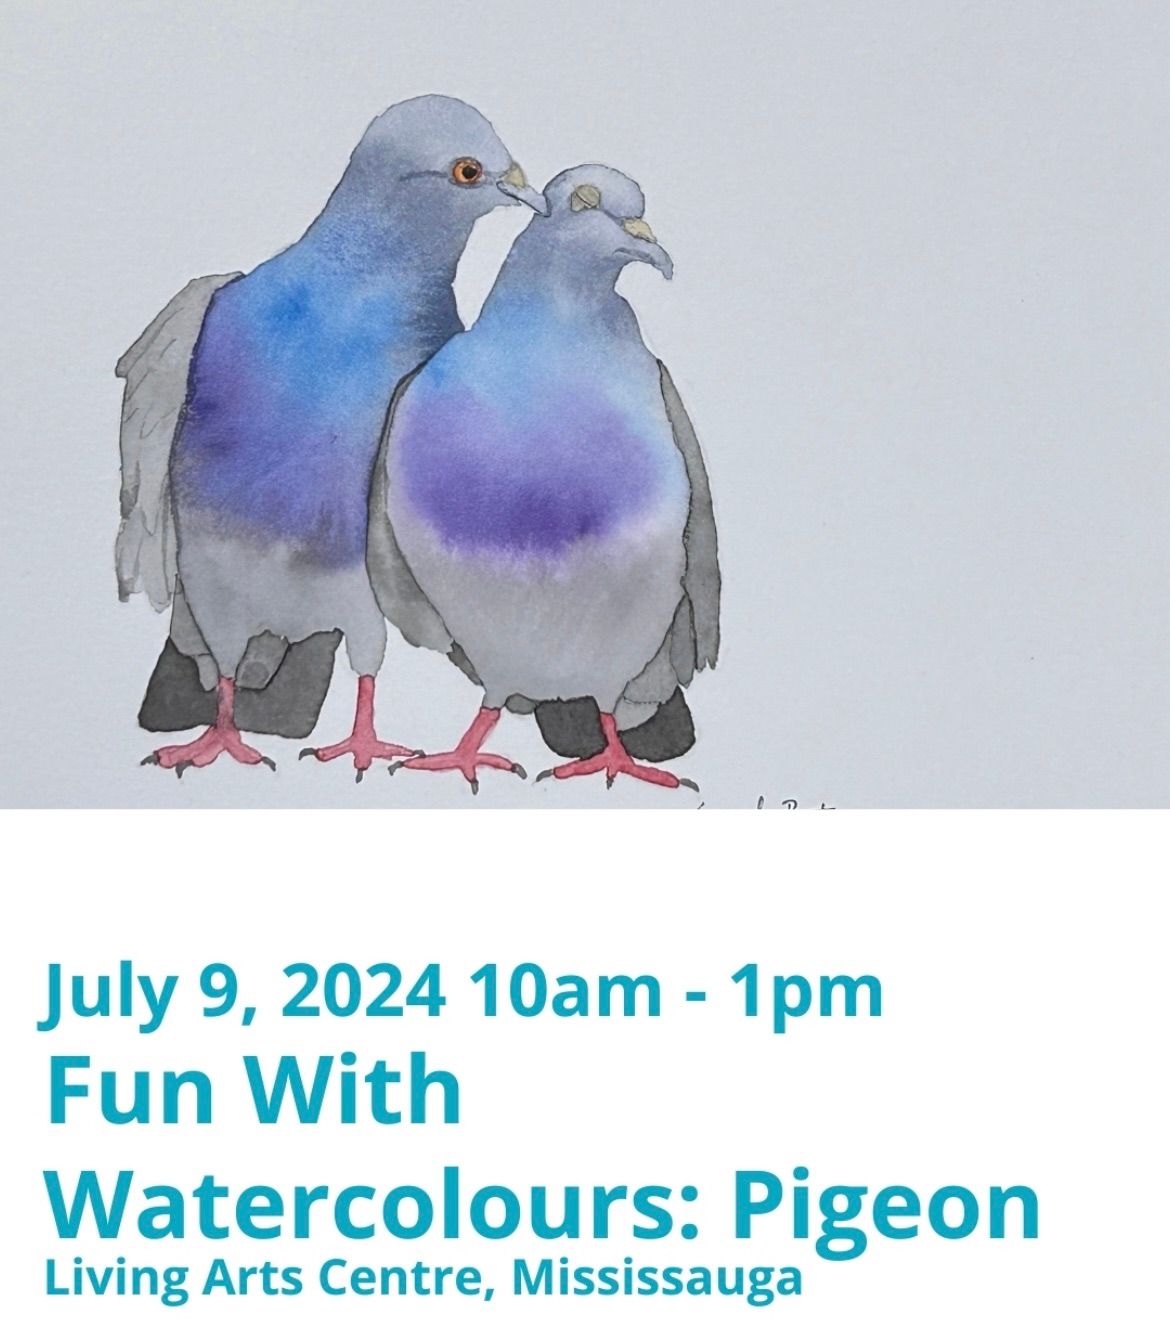 Fun with Watercolours -Painting Pigeons